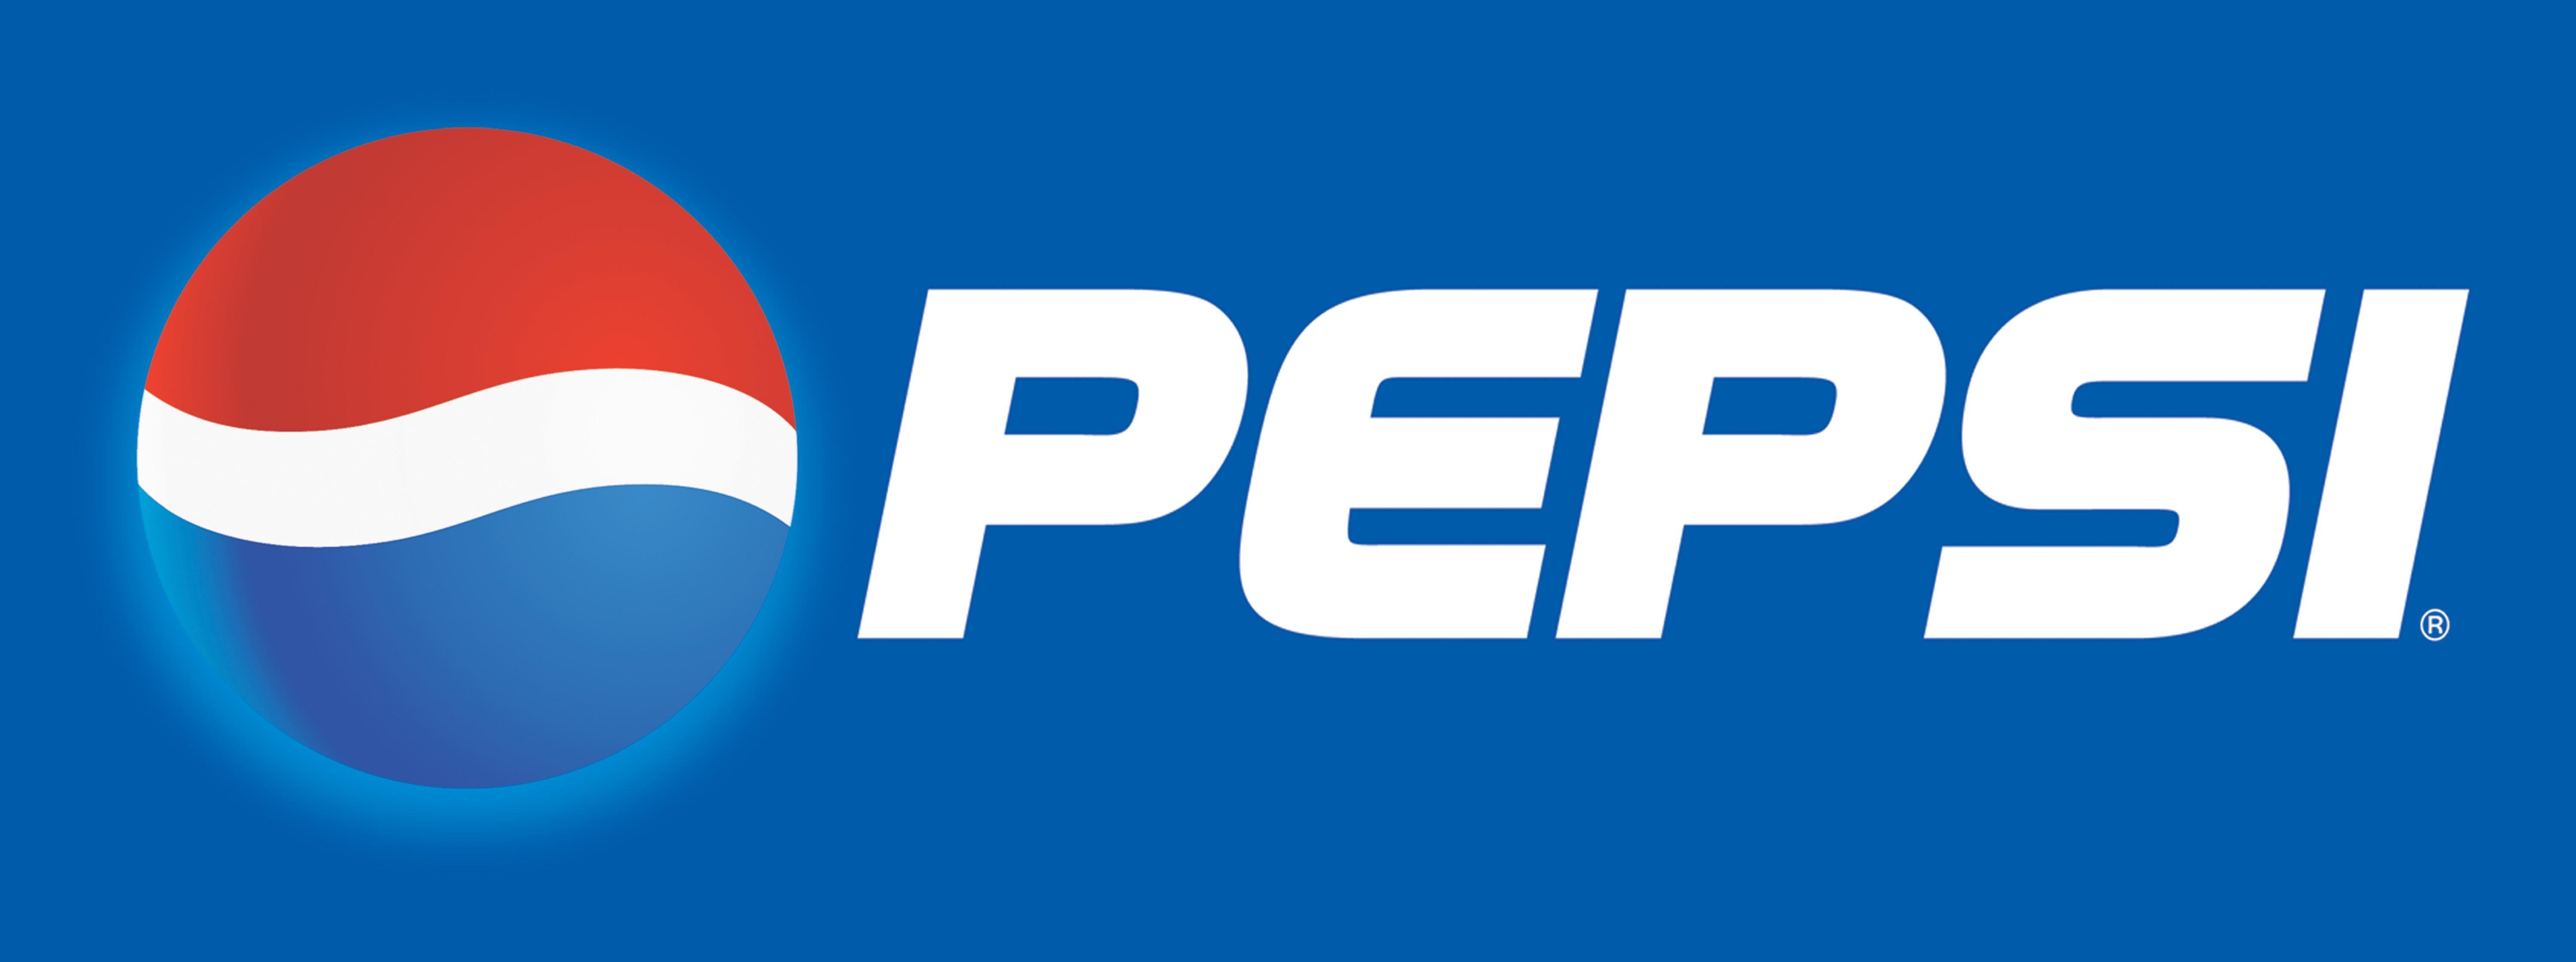 PepsiCo Brand Logo - Dividends Forever! Why I Am Buying Pepsi - PepsiCo Inc. (NYSE:PEP ...